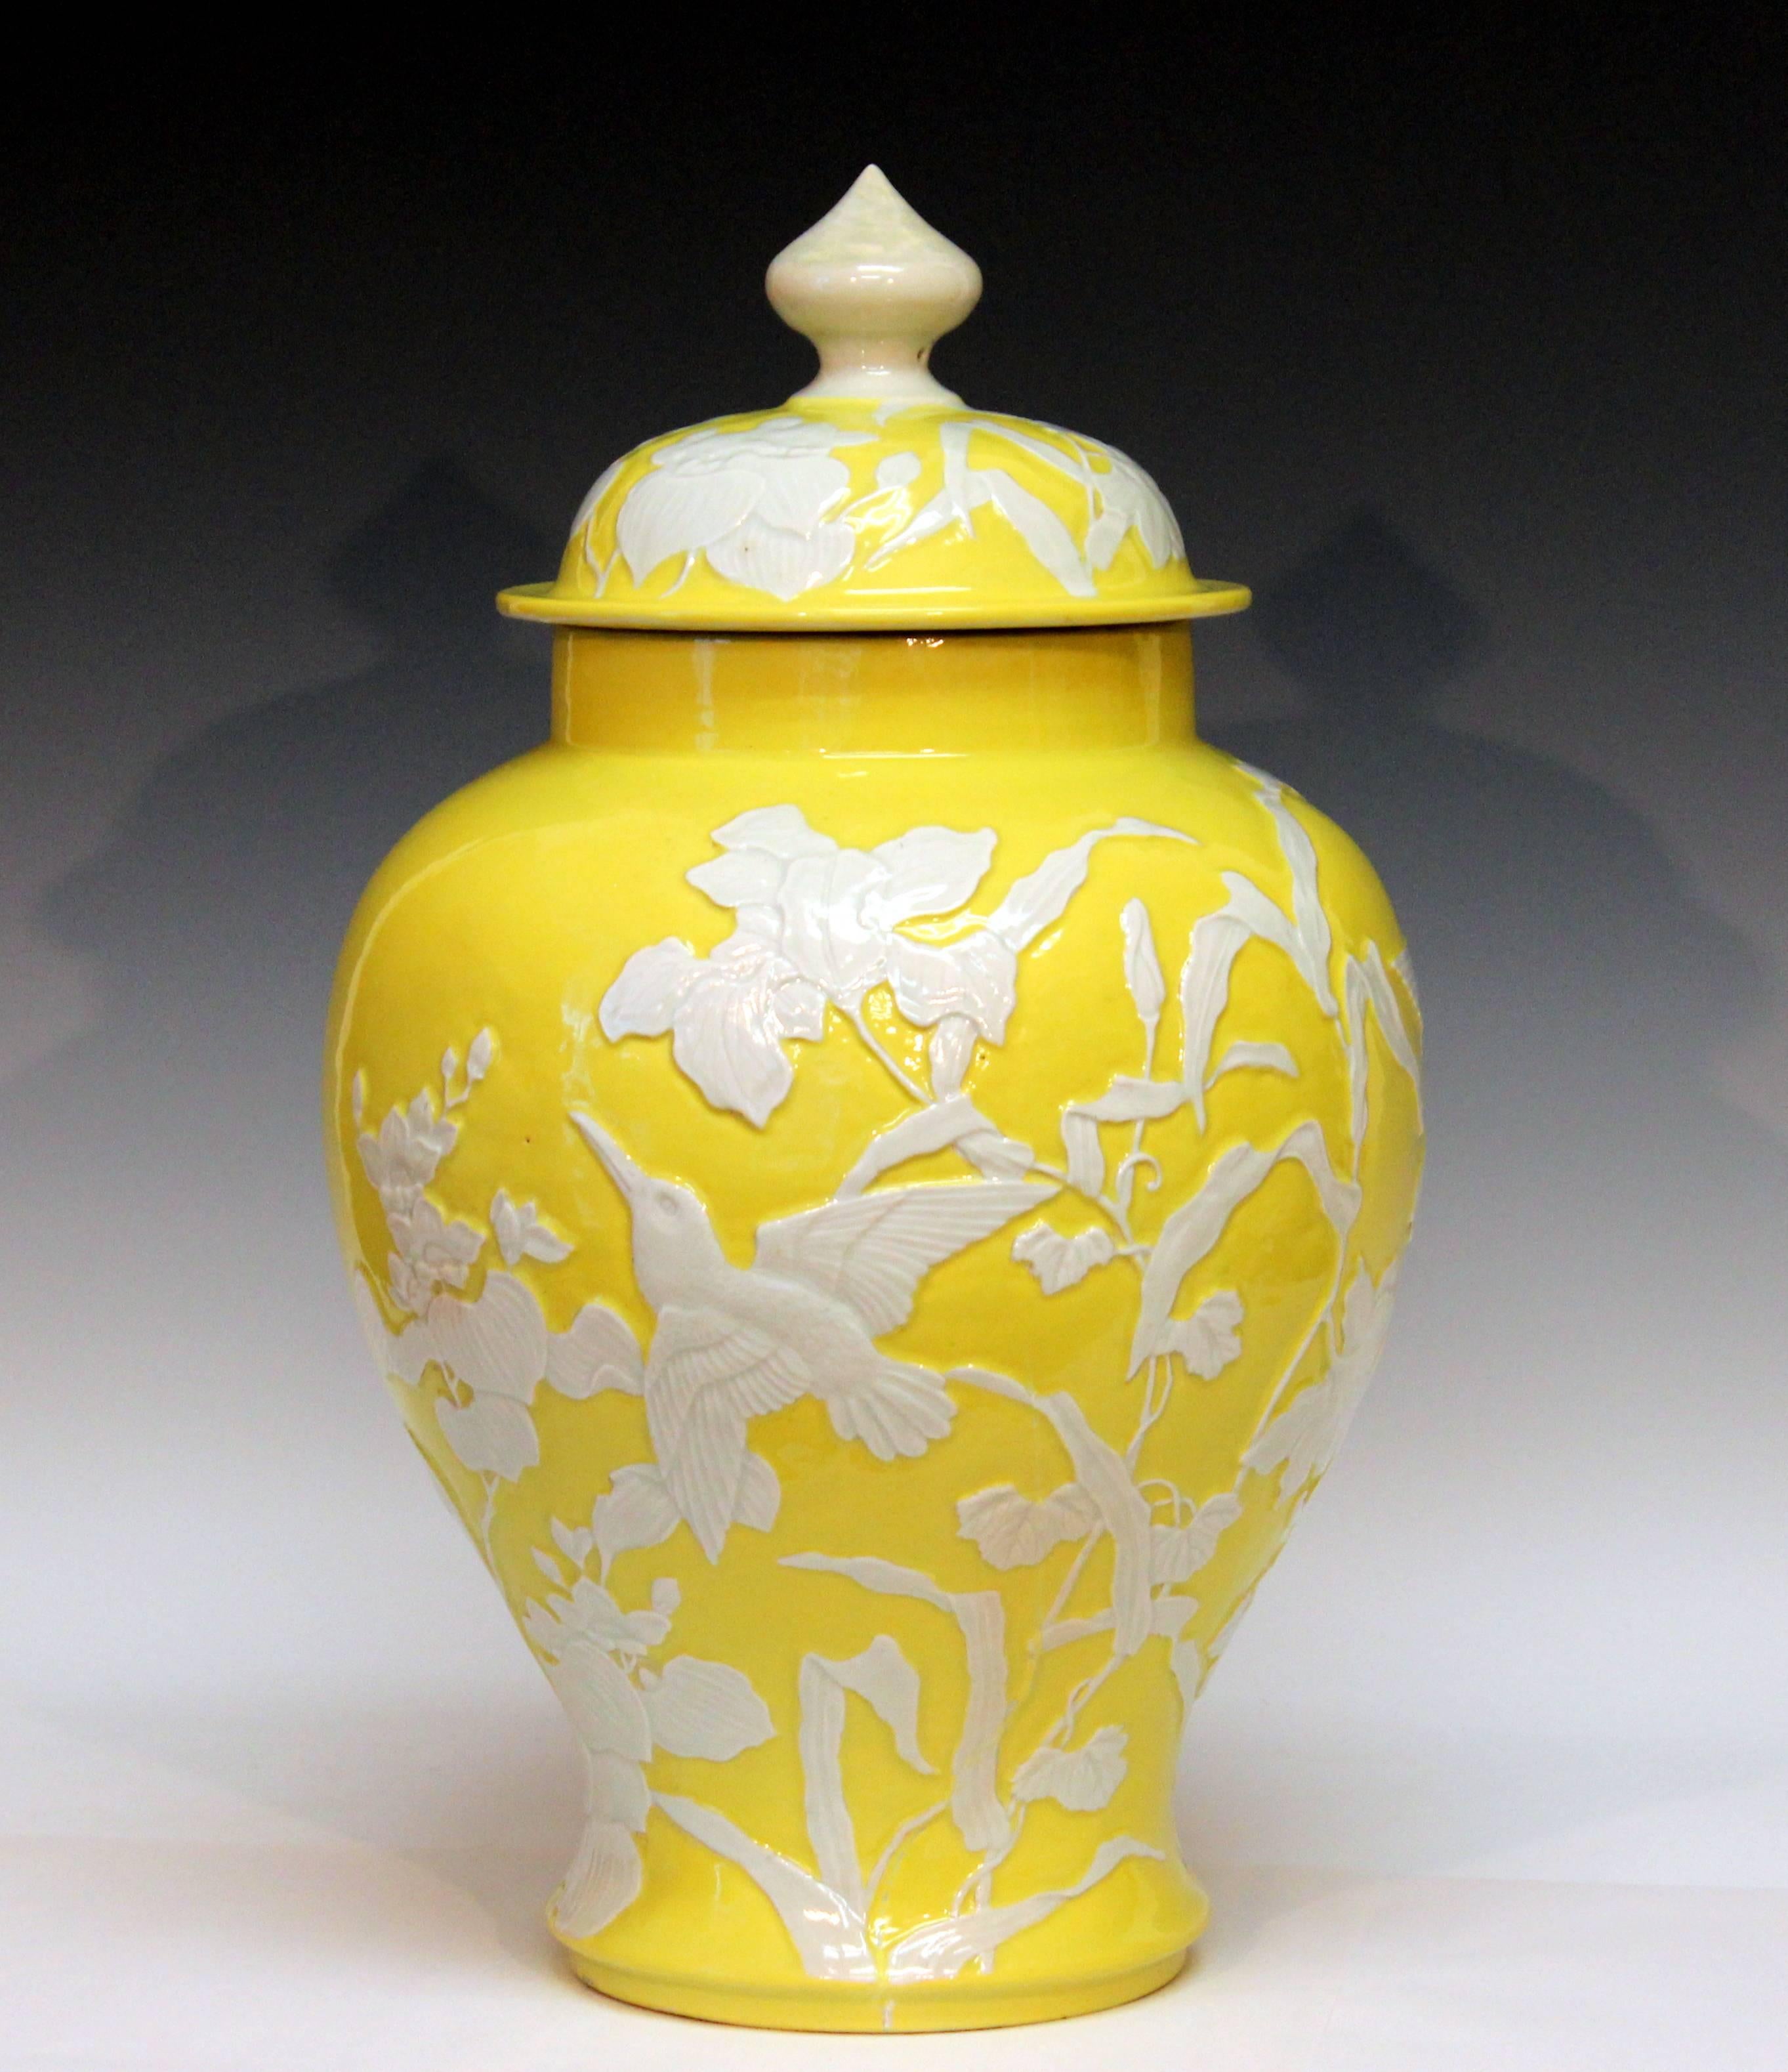 Large Japanese studio porcelain covered vase with finely carved decoration of birds amidst foliage set against a cheerful yellow ground, circa 1910. Measures: 18 1/2" high, 11 1/2" diameter. Excellent condition, repair to finial, firing